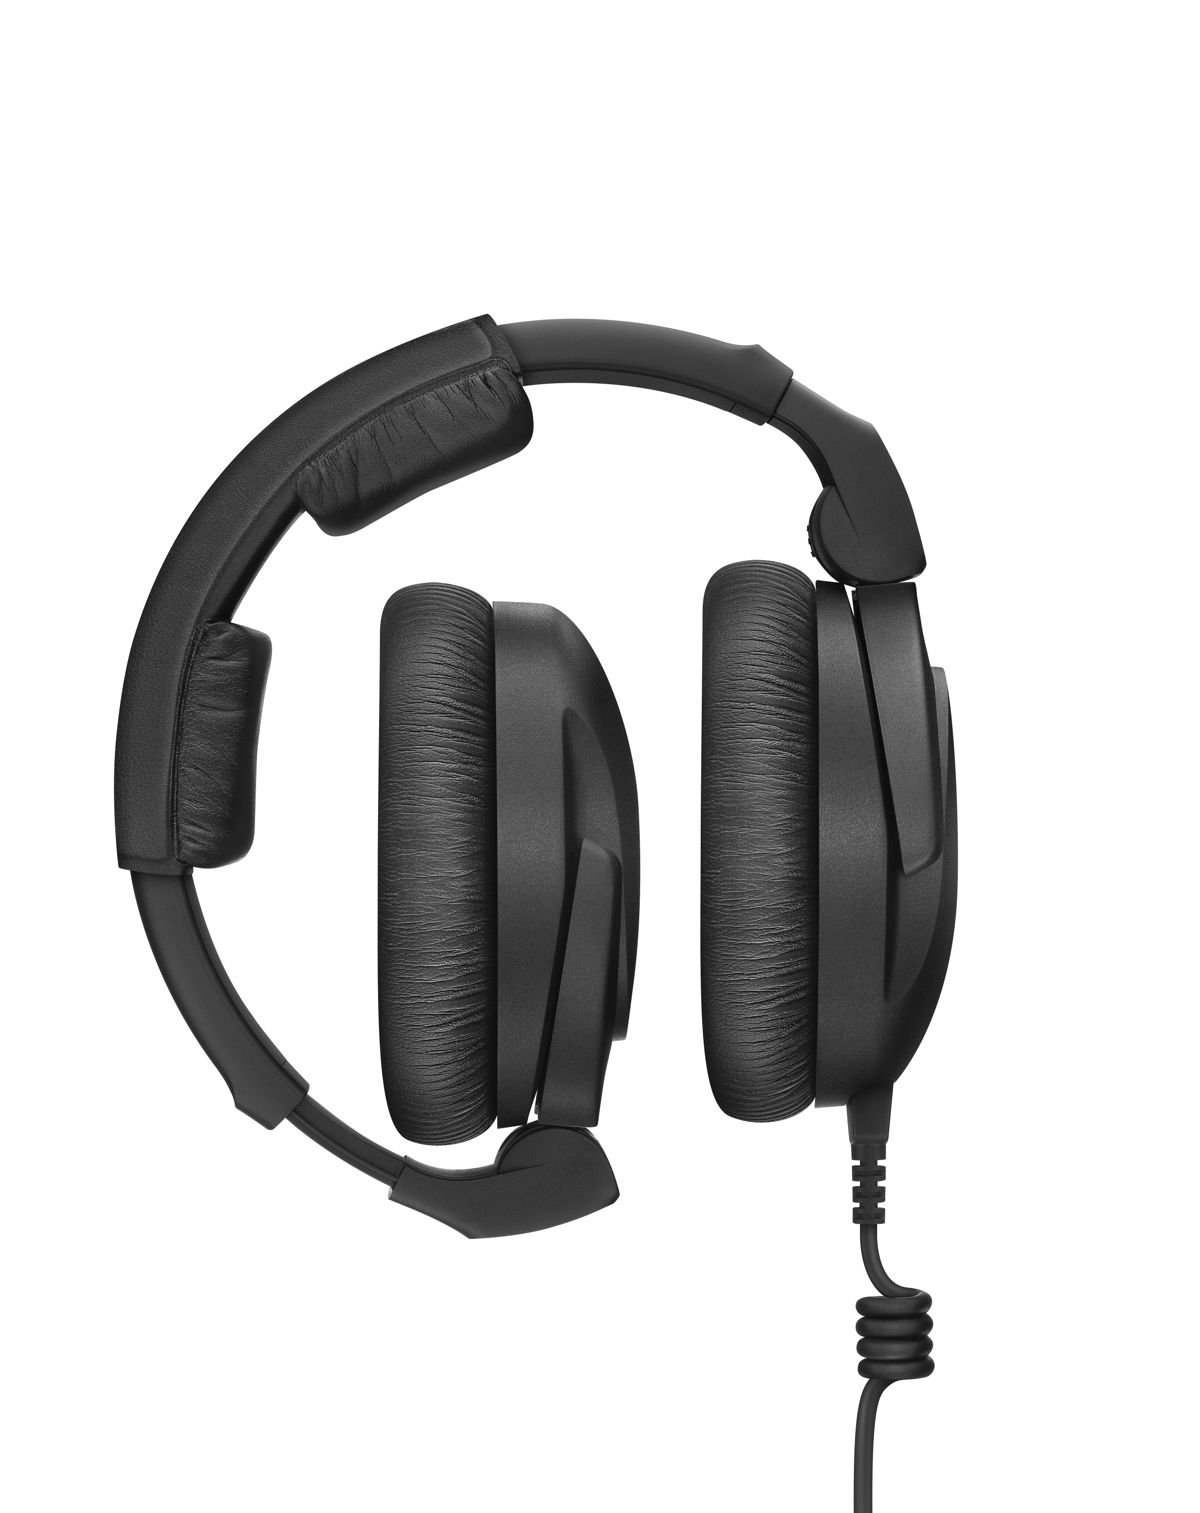 They fold for easy transport: The HD 300 PRO headphones combine ruggedness with detailed, natural audio reproduction 